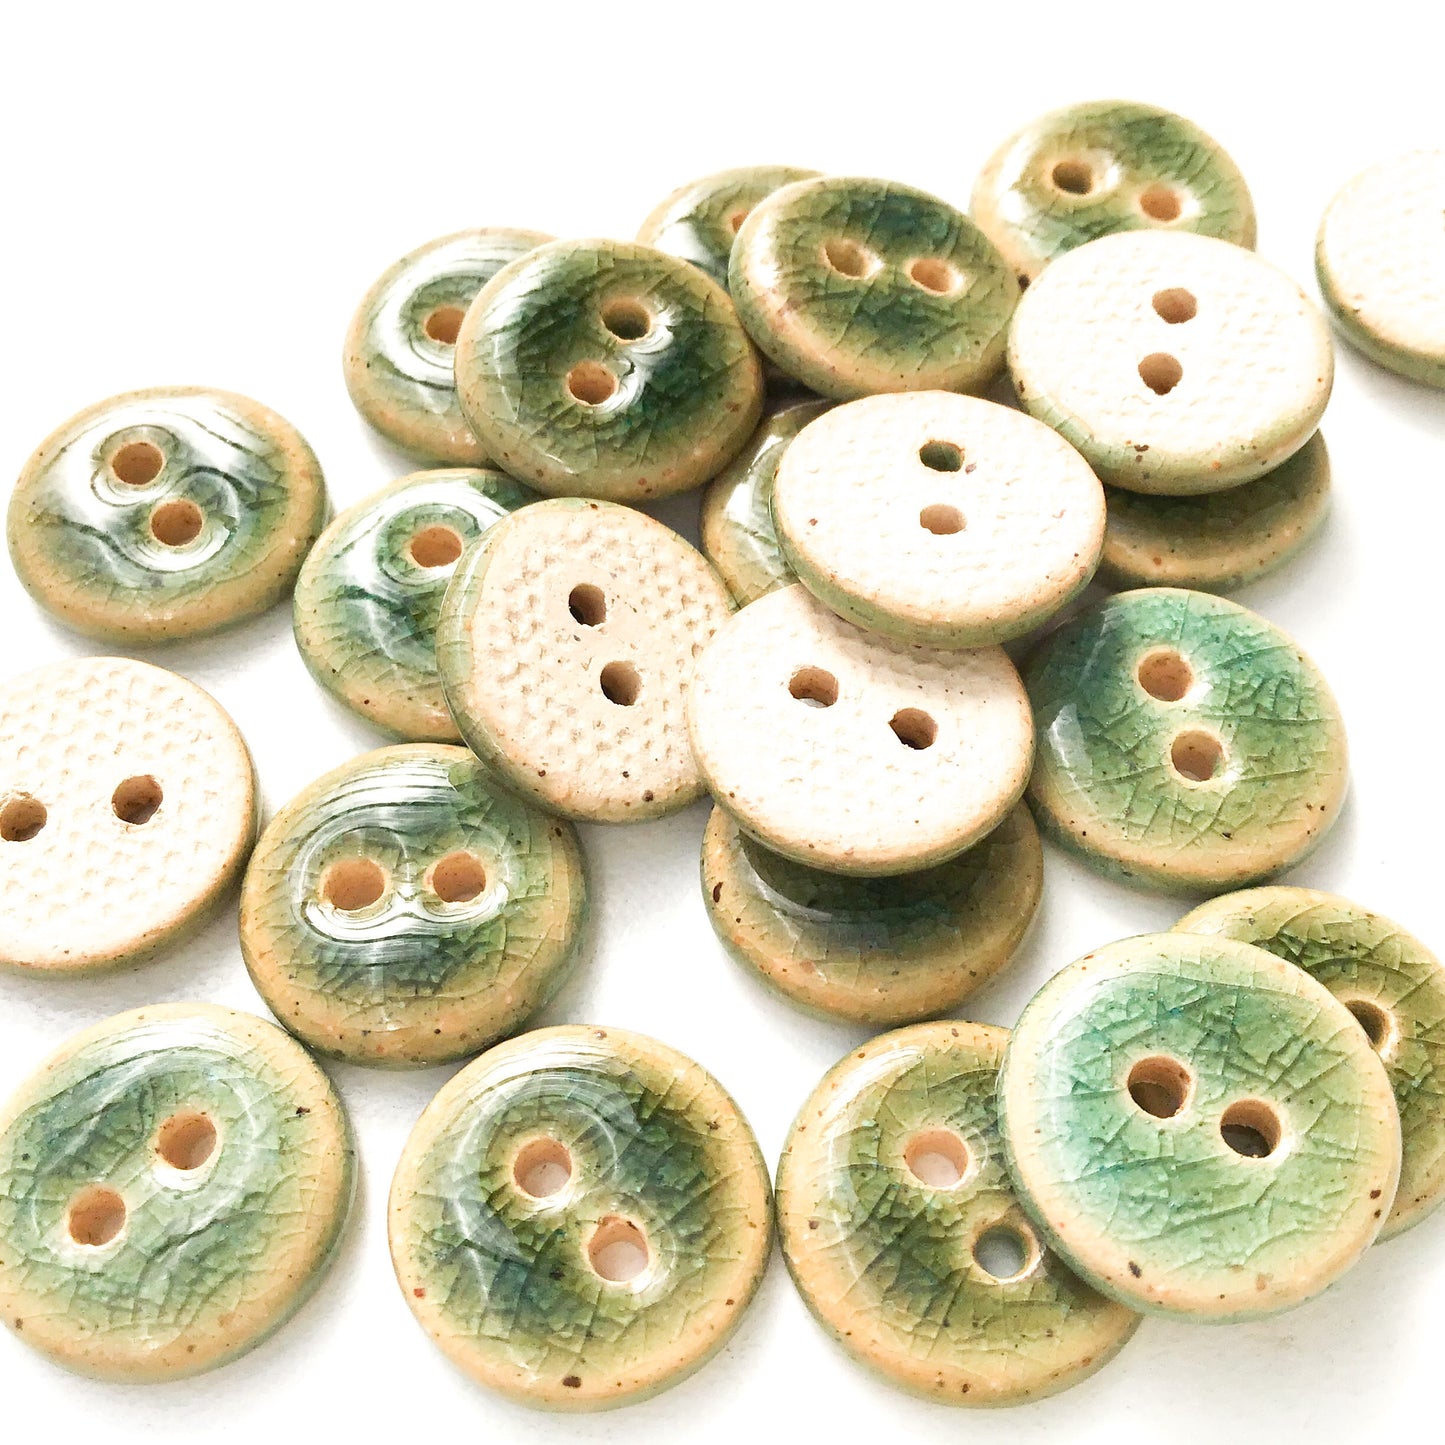 Blue-Green Crackle Ceramic Buttons - Turquoise Clay Buttons - 9/16" (ws-11)